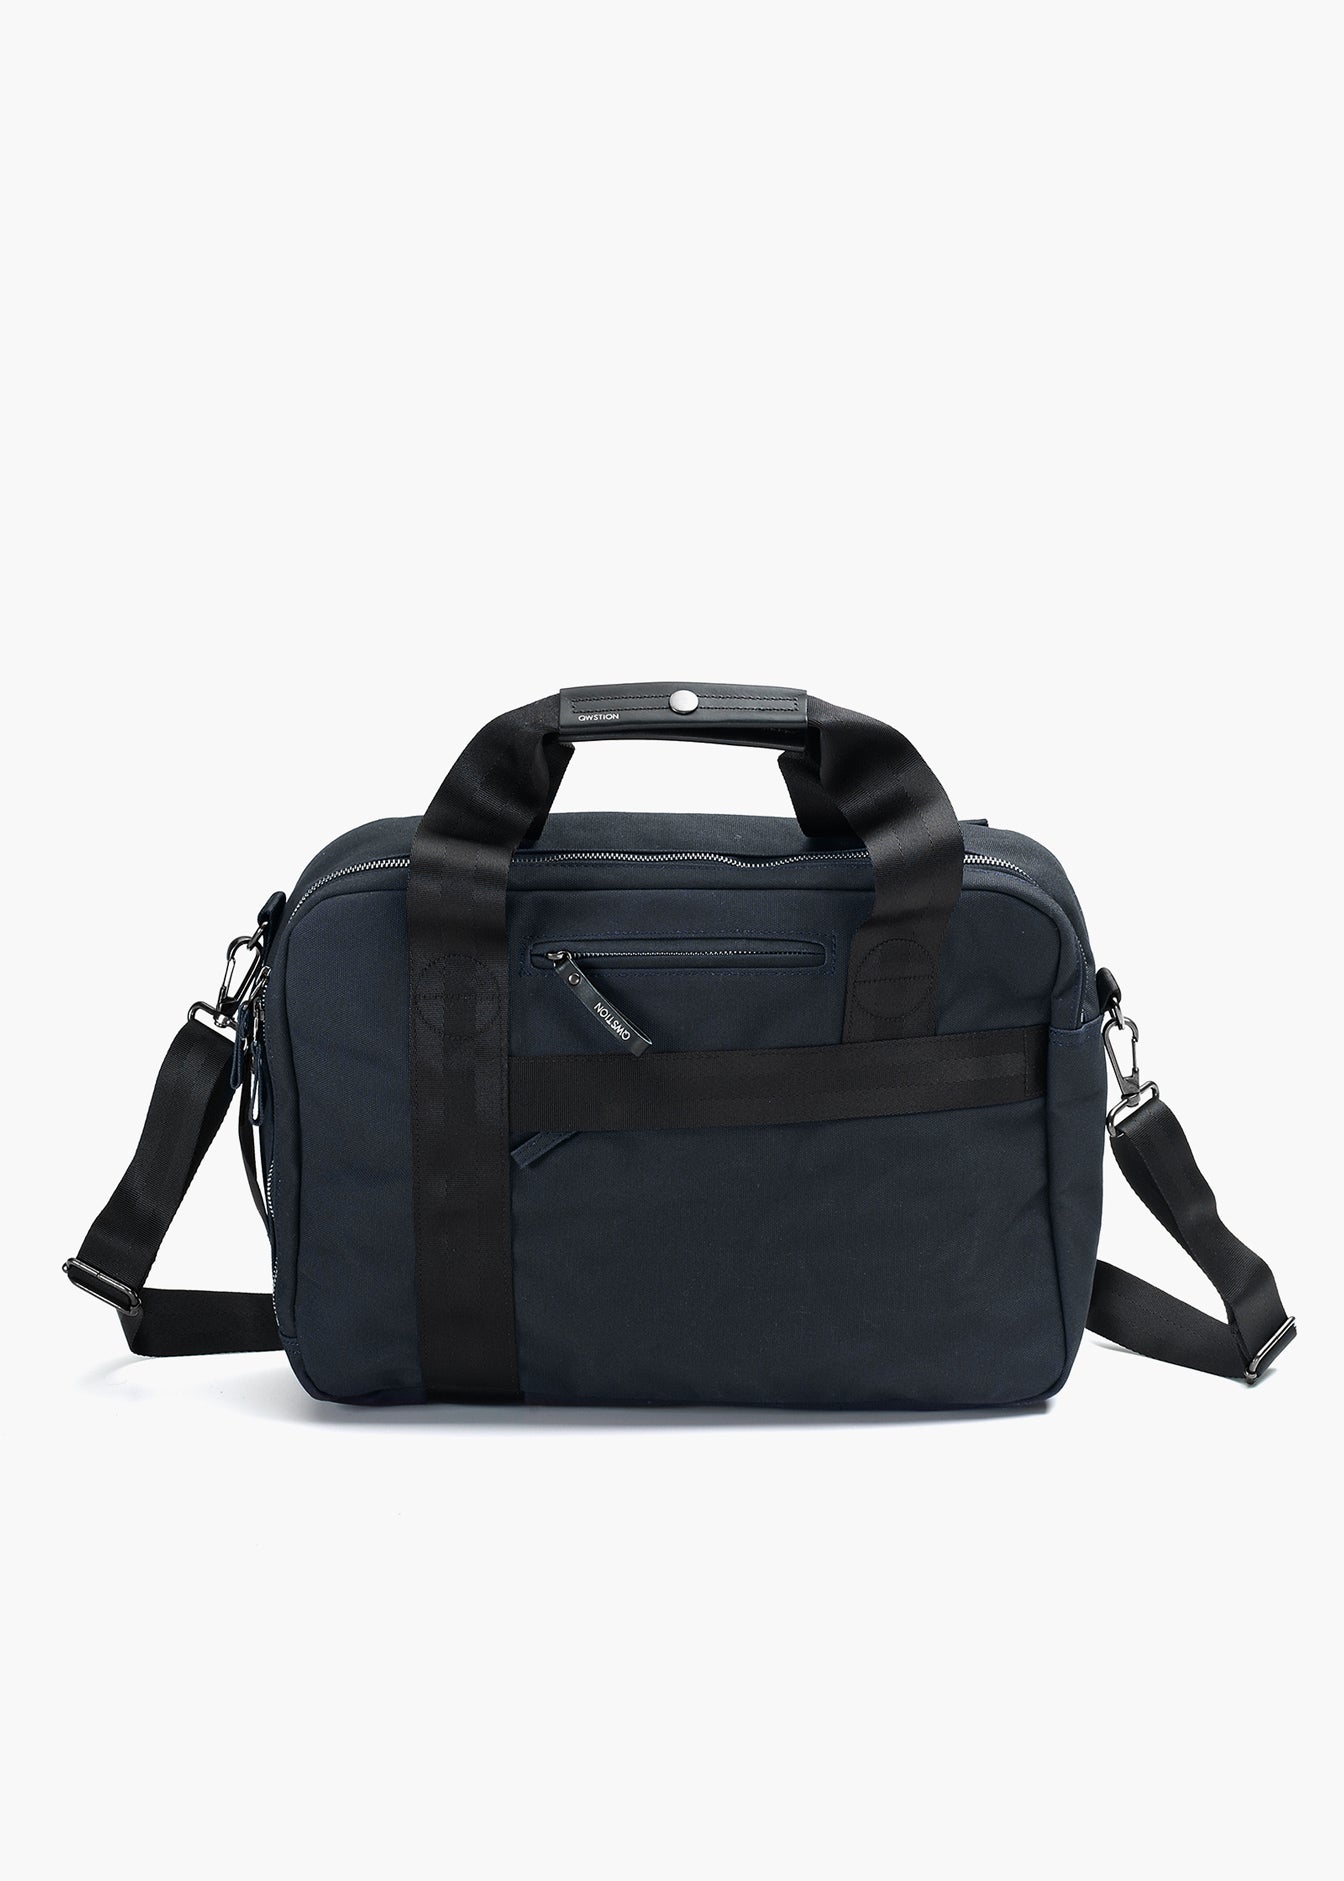 Office Bag - convertible bag - qwstion - backpack - laptop case 